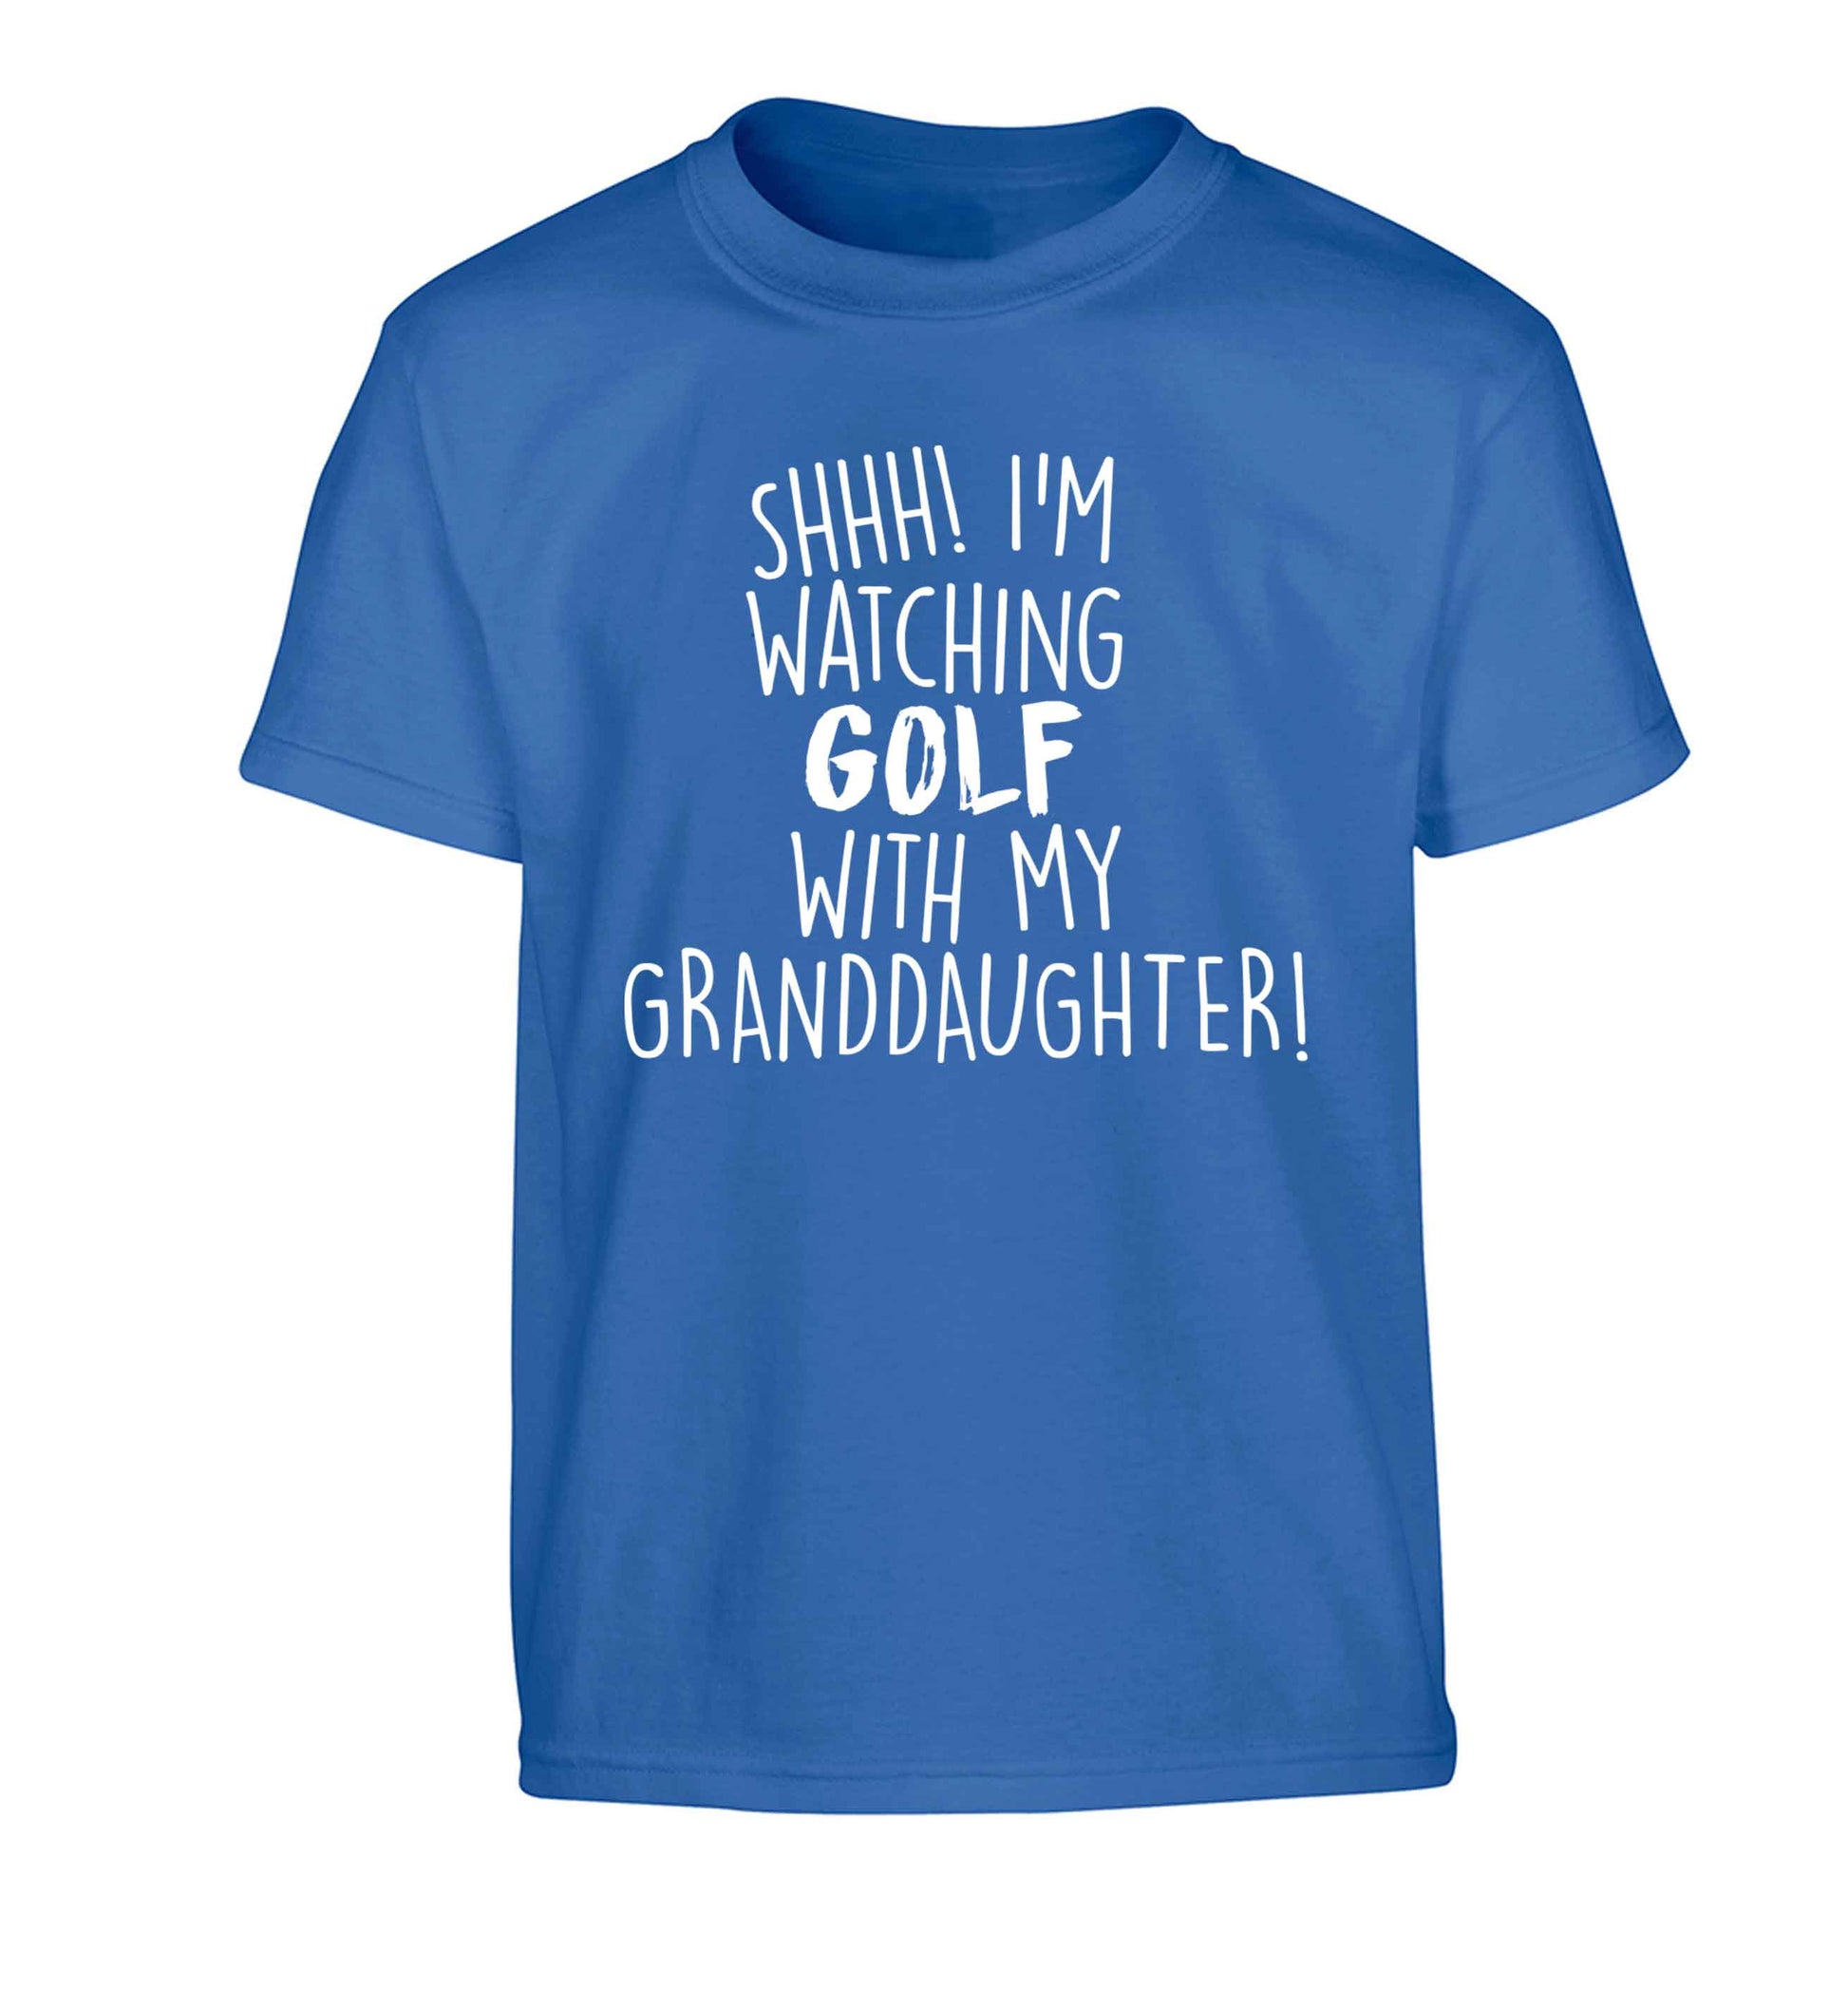 Shh I'm watching golf with my granddaughter Children's blue Tshirt 12-13 Years